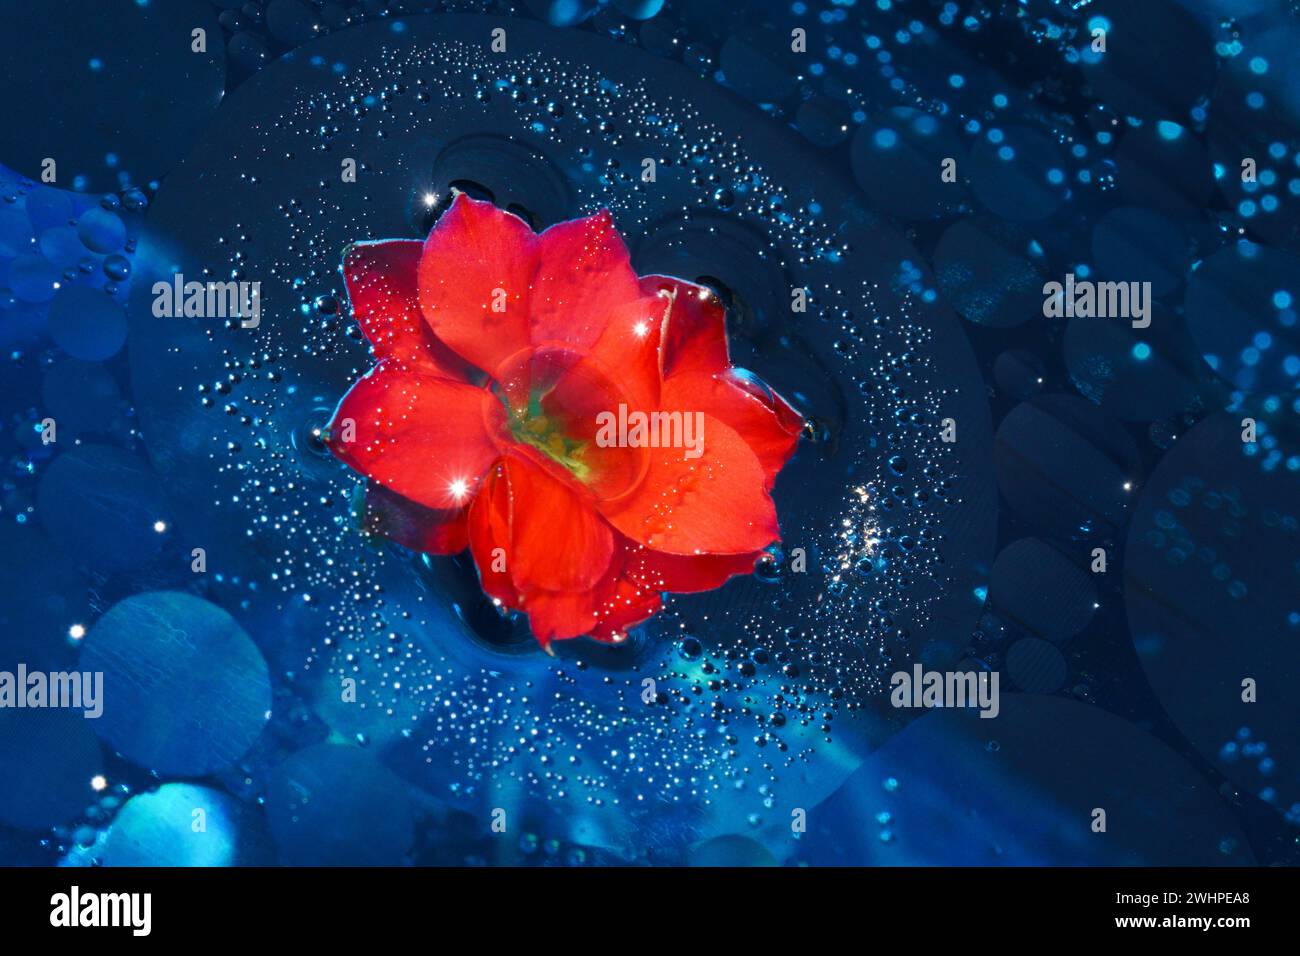 Red shiny flower on blue aqua background and a translucent centurion circle in on water space Stock Photo